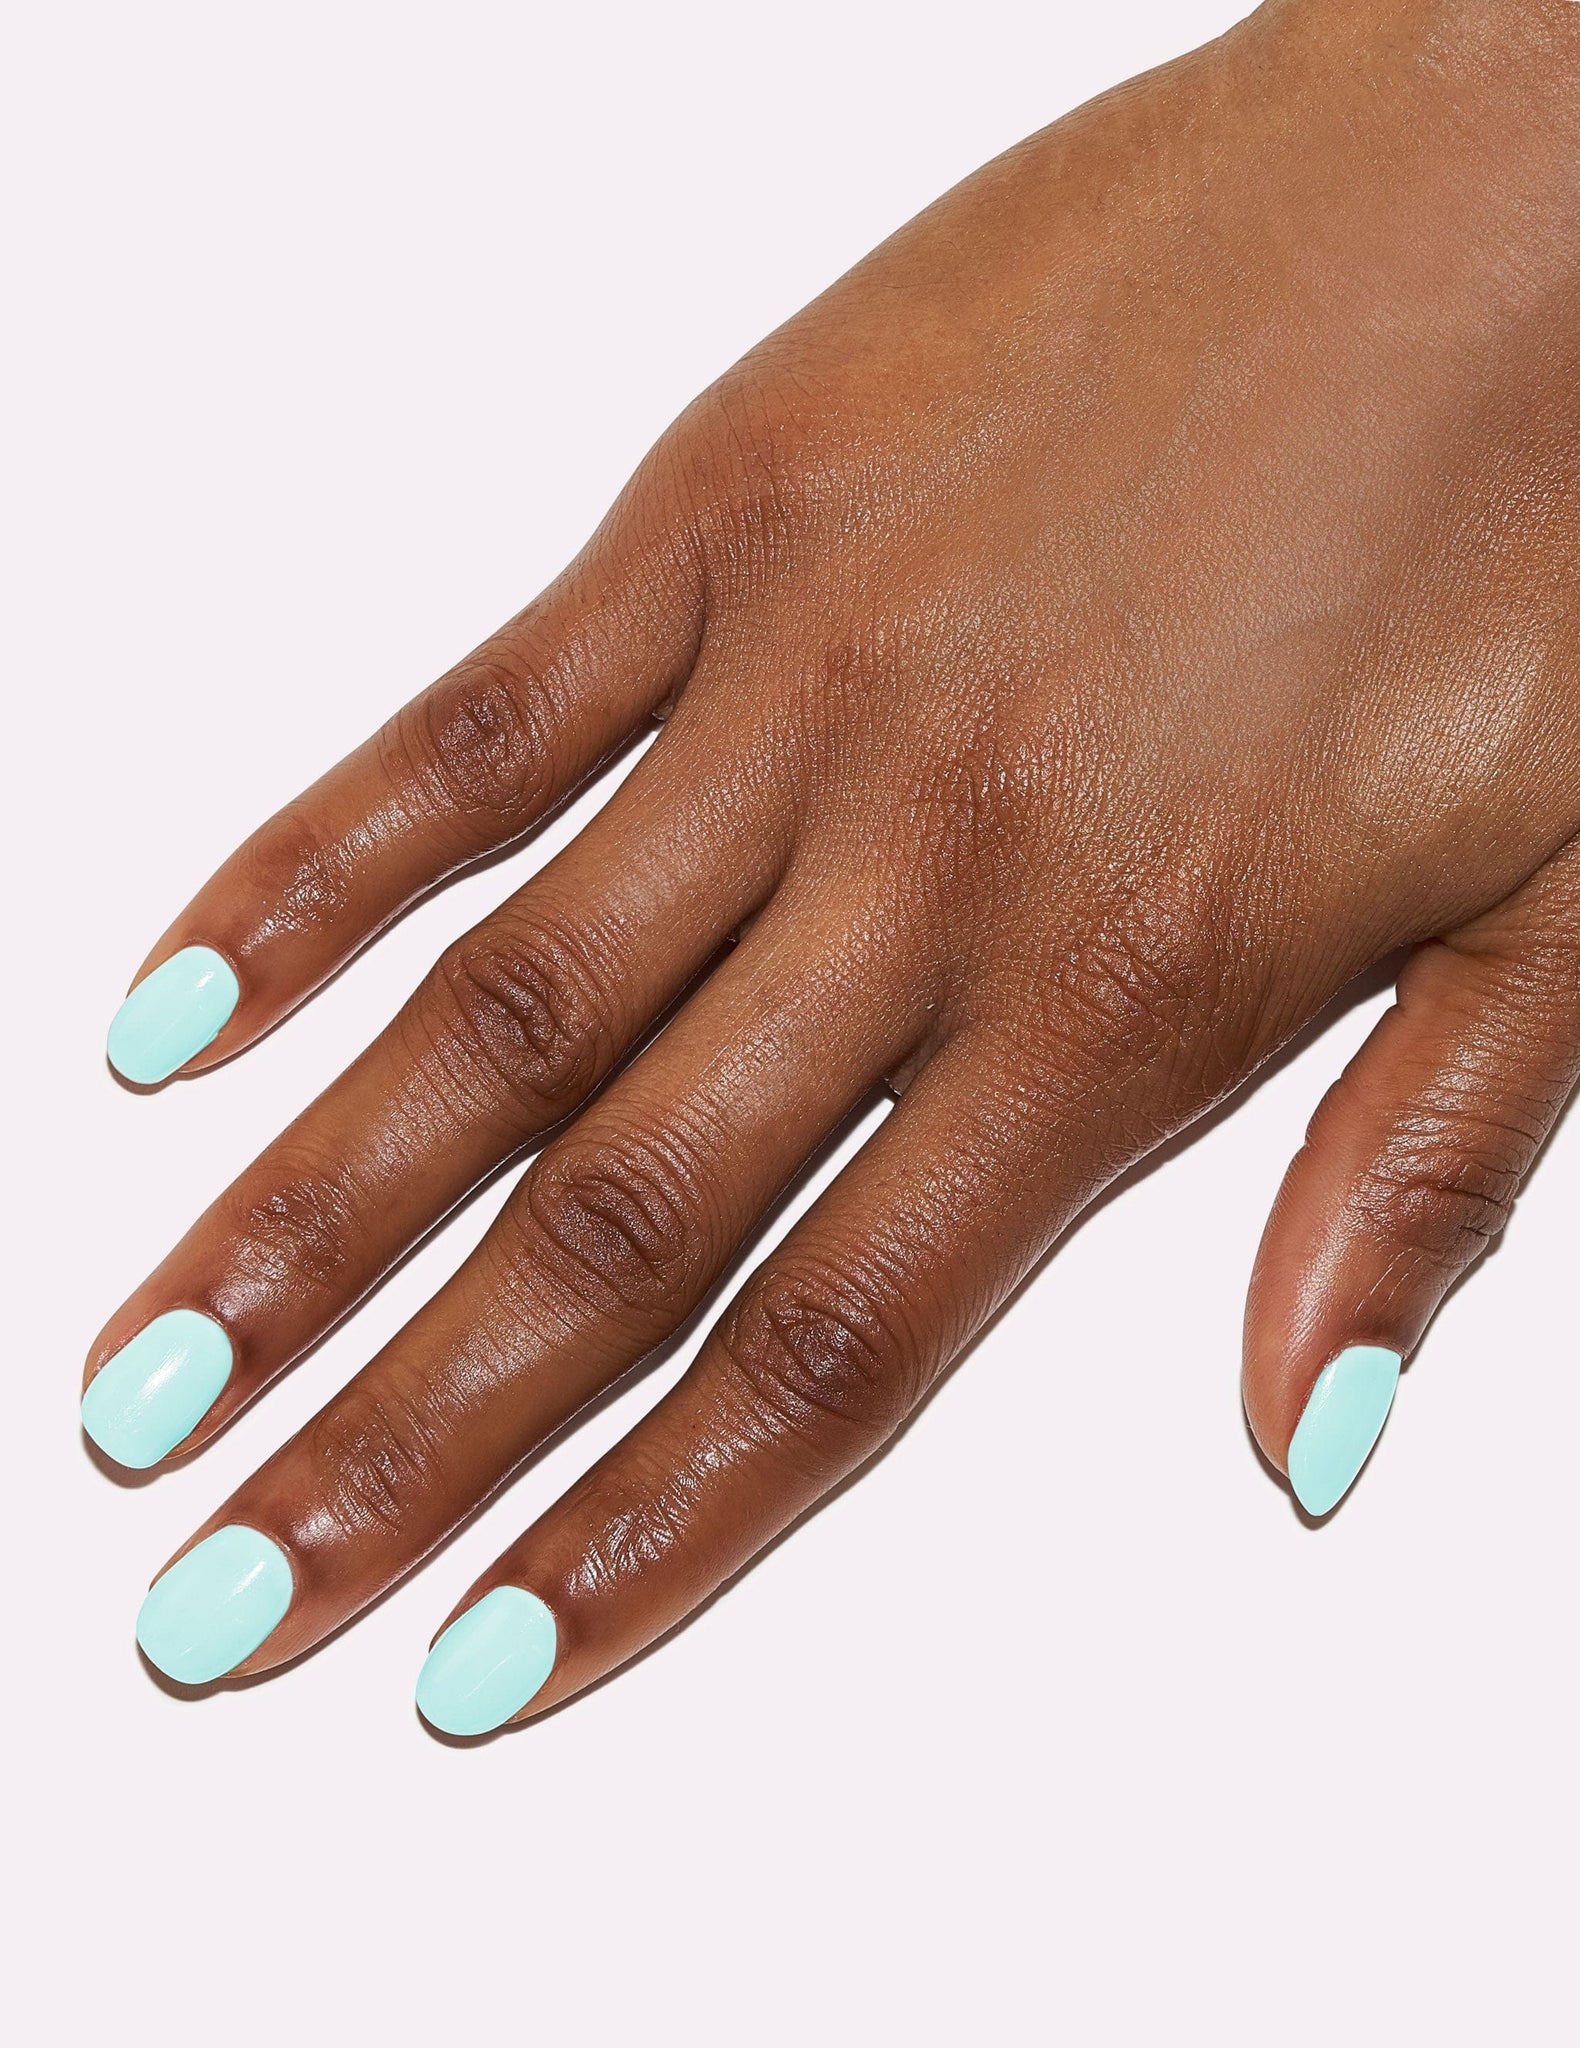 50+ Stunning Mint green Nail Designs You Need To Try!